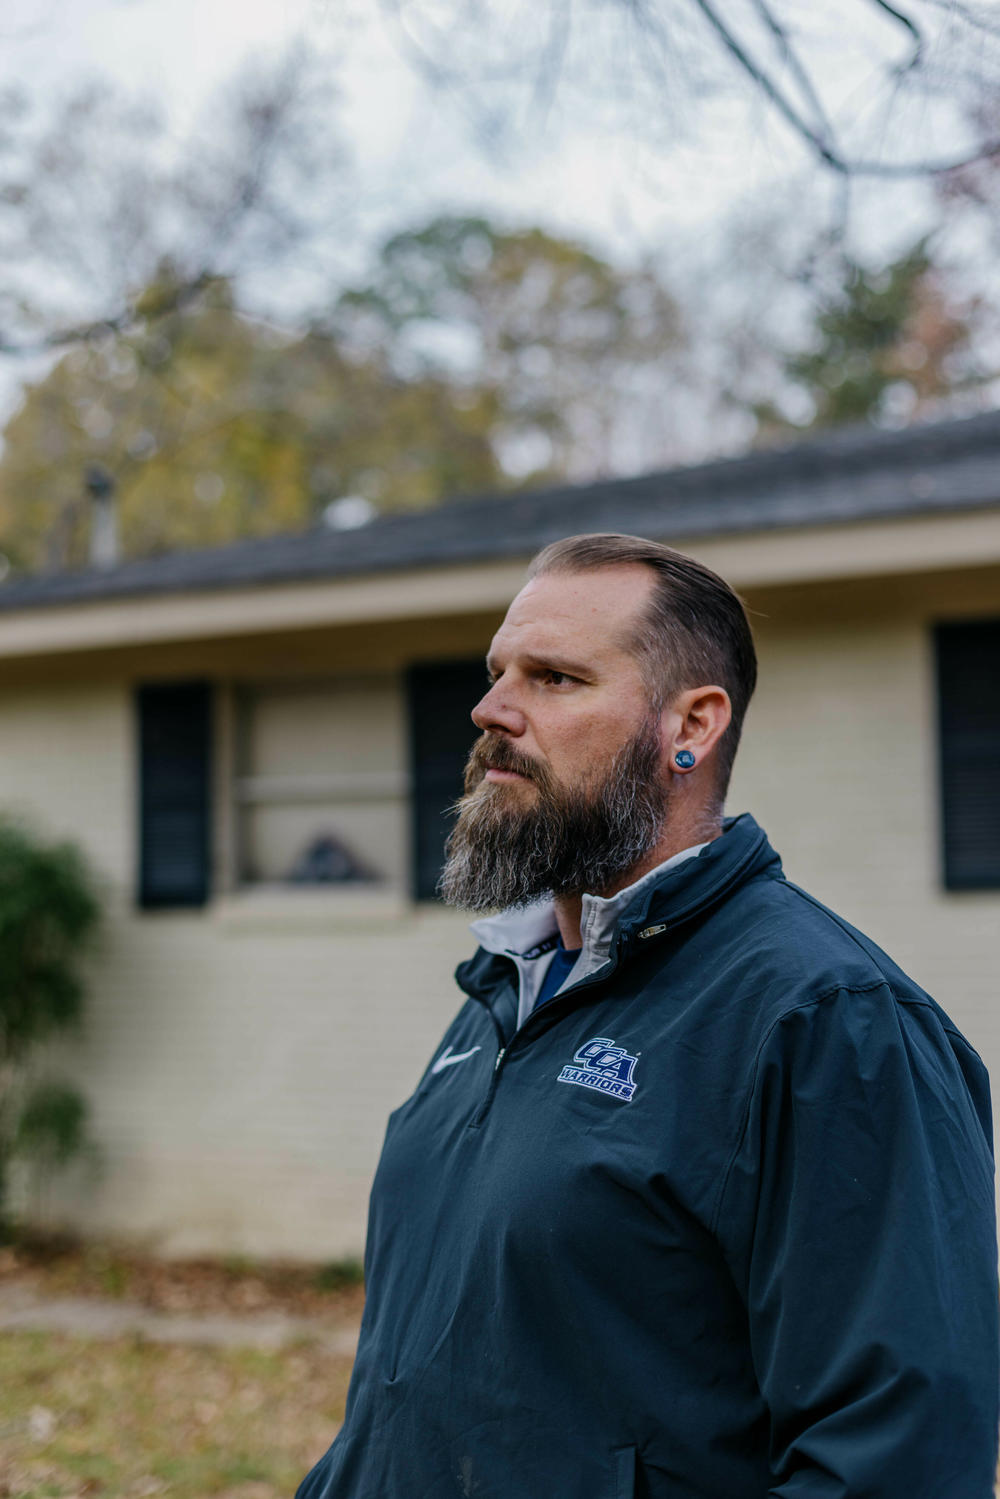 The VA has paused home foreclosures, which gives Miles some breathing room.